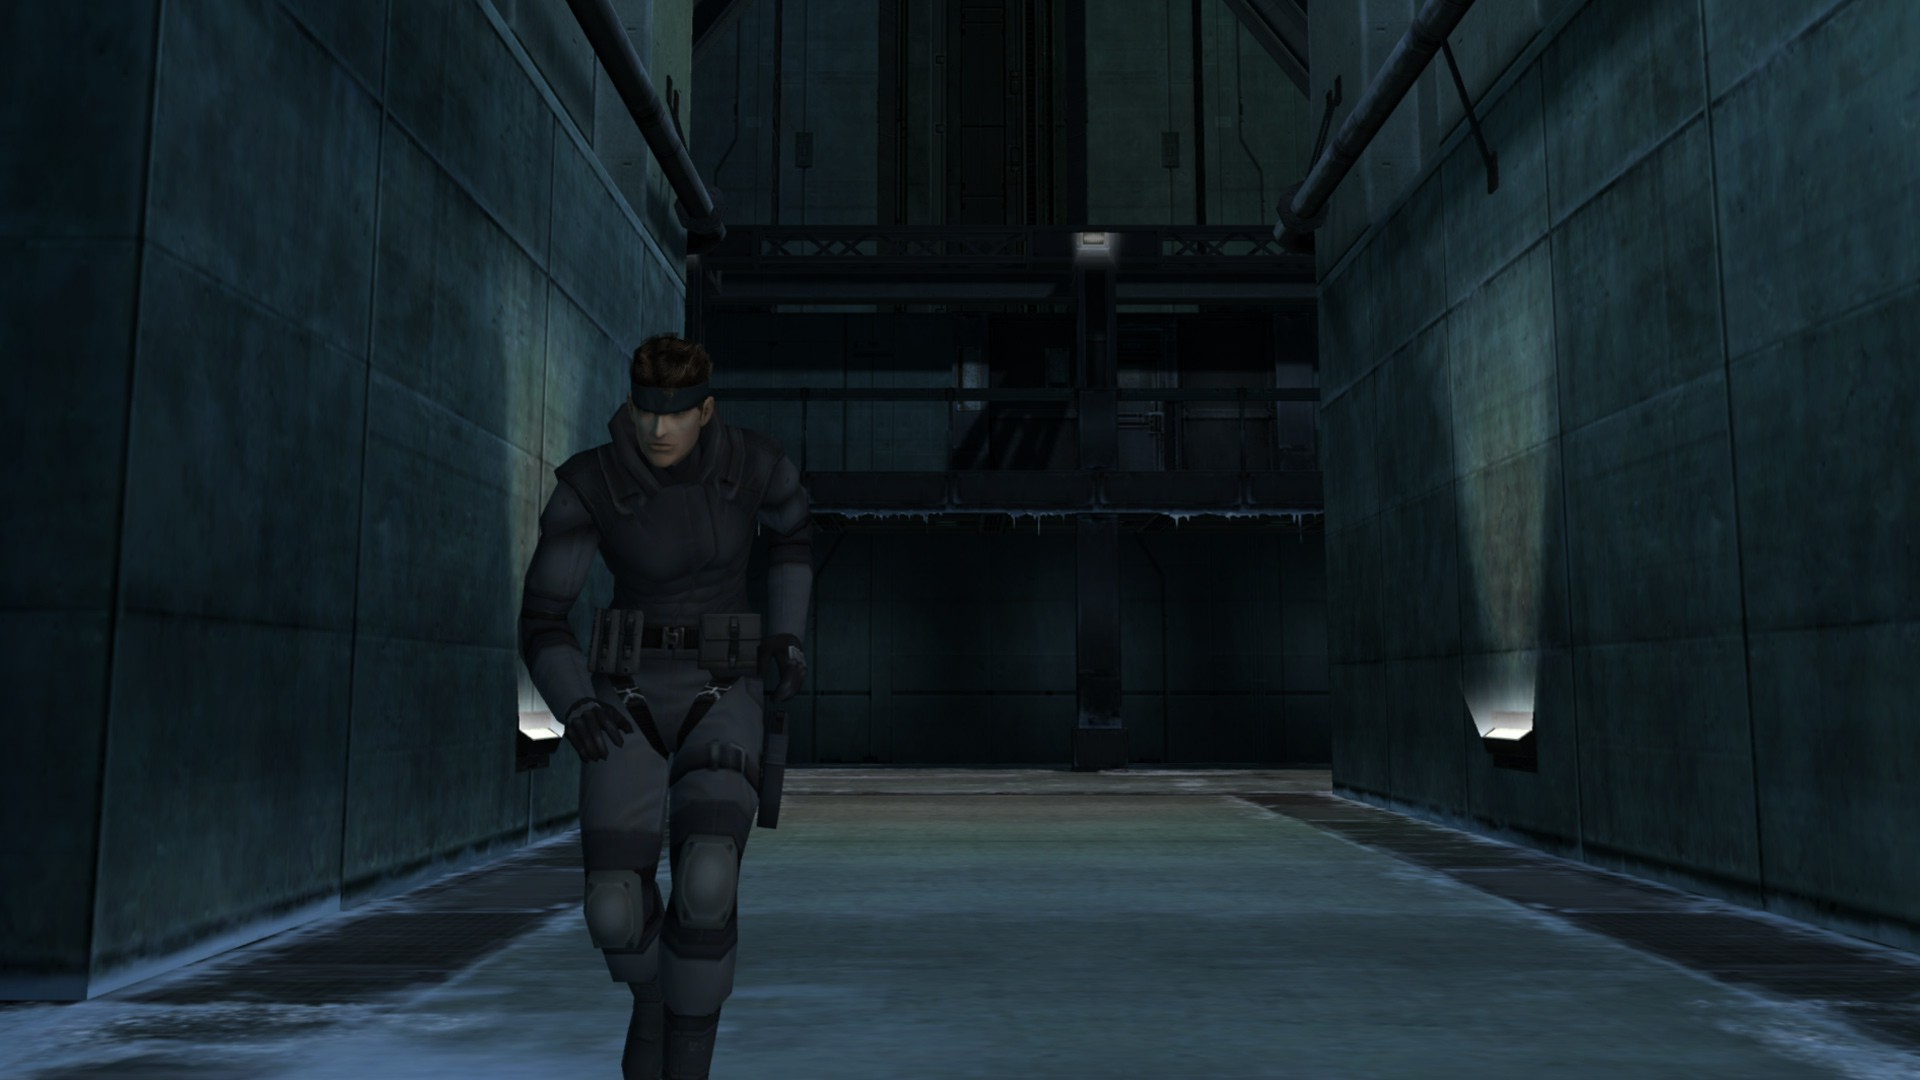 1920x1080 Wallpaper : Metal Gear Solid, Solid Snake, GameCube, Metal Gear Solid The Twin Snakes, darkness, screenshot, px, pc game 4kWallpaper 528414 HD Wallpapers